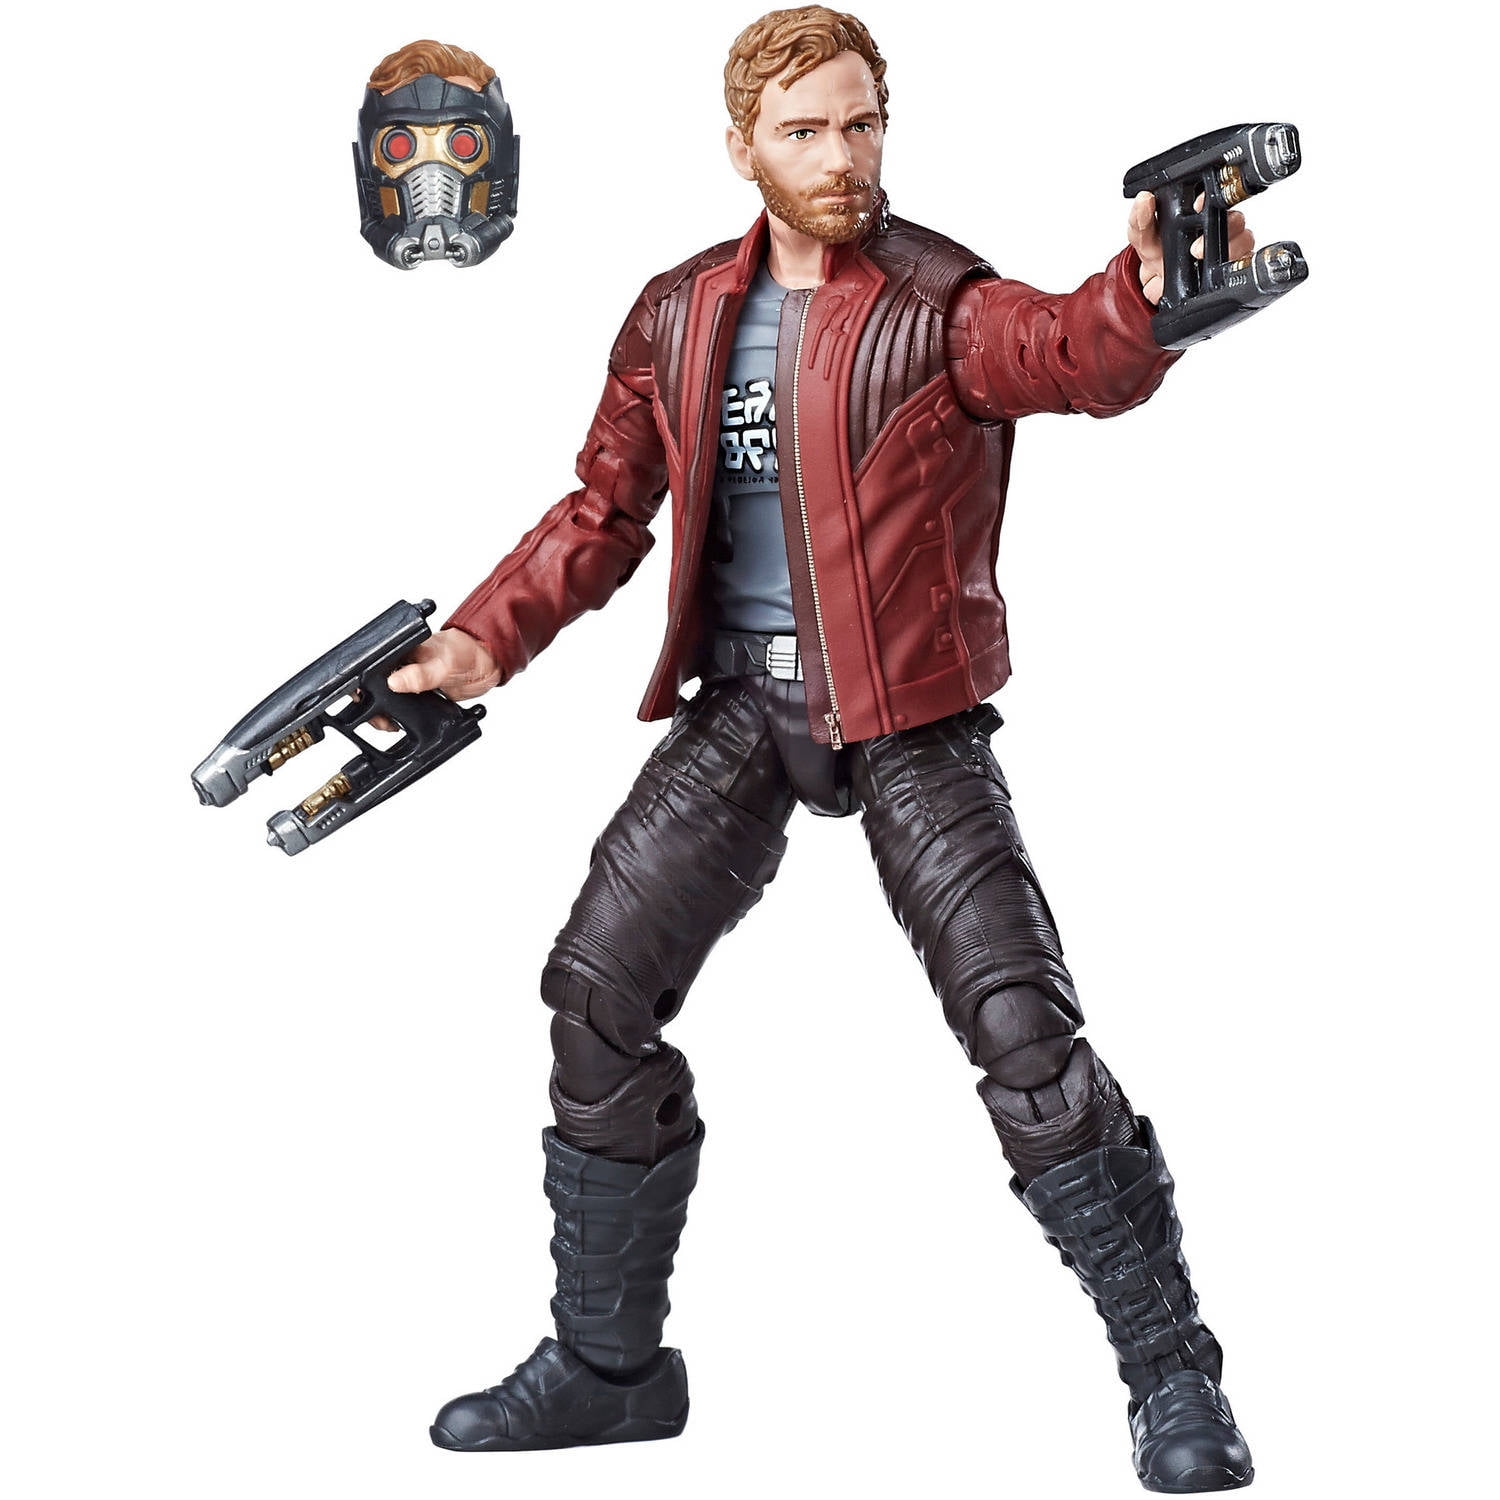 Marvel Legends Series 6-inch Scale Action Figure Toy T'Challa Star-Lord,  Includes Premium Design, 3 Accessories, and Build-a-Figure Part - Marvel